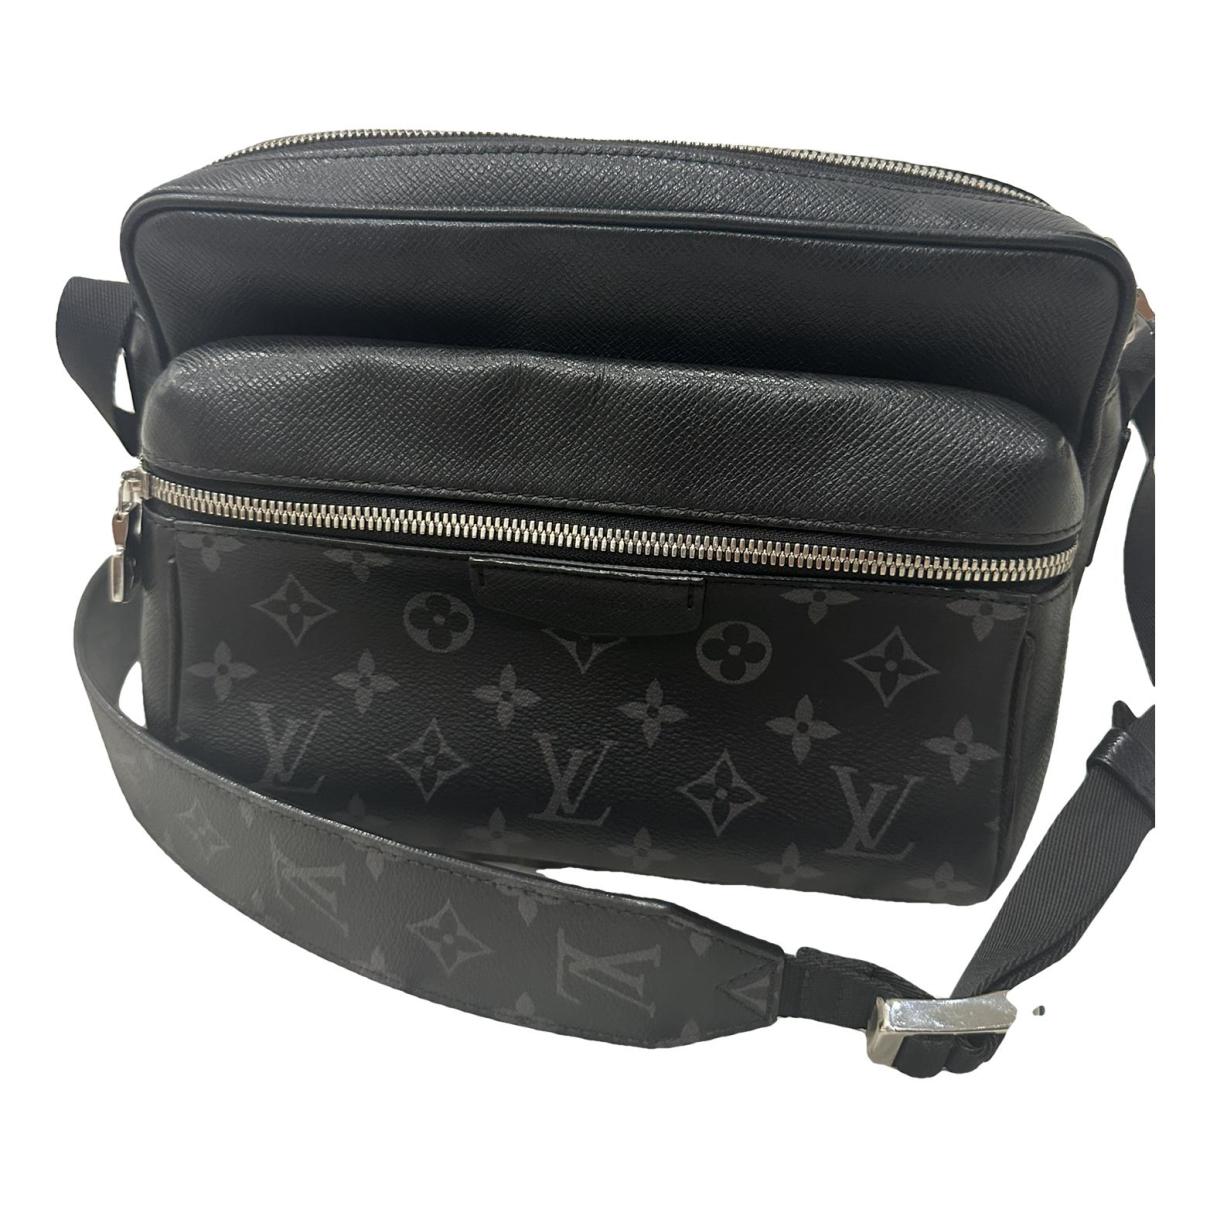 Discovery leather travel bag Louis Vuitton Black in Leather - 23463689